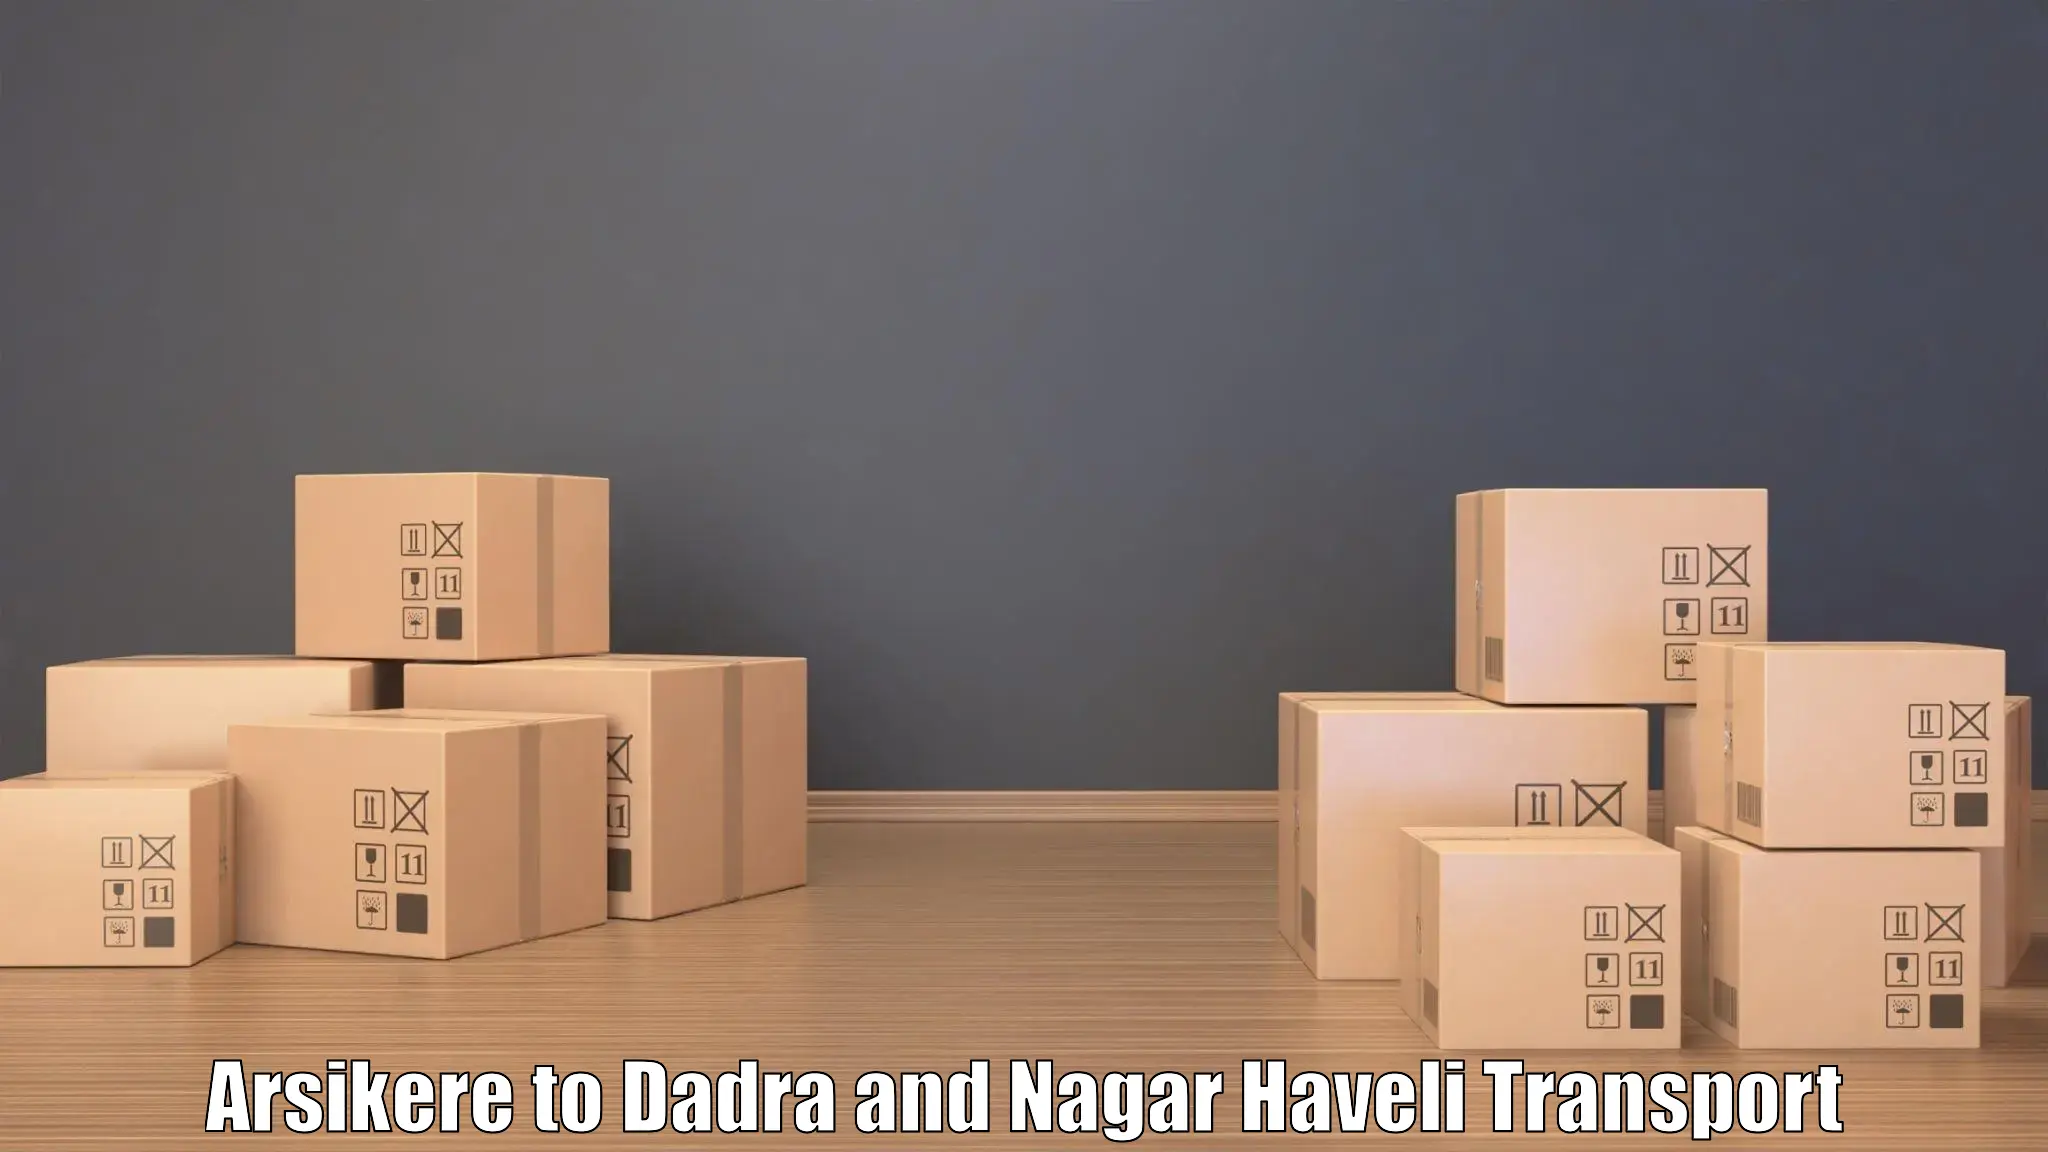 Container transport service Arsikere to Dadra and Nagar Haveli